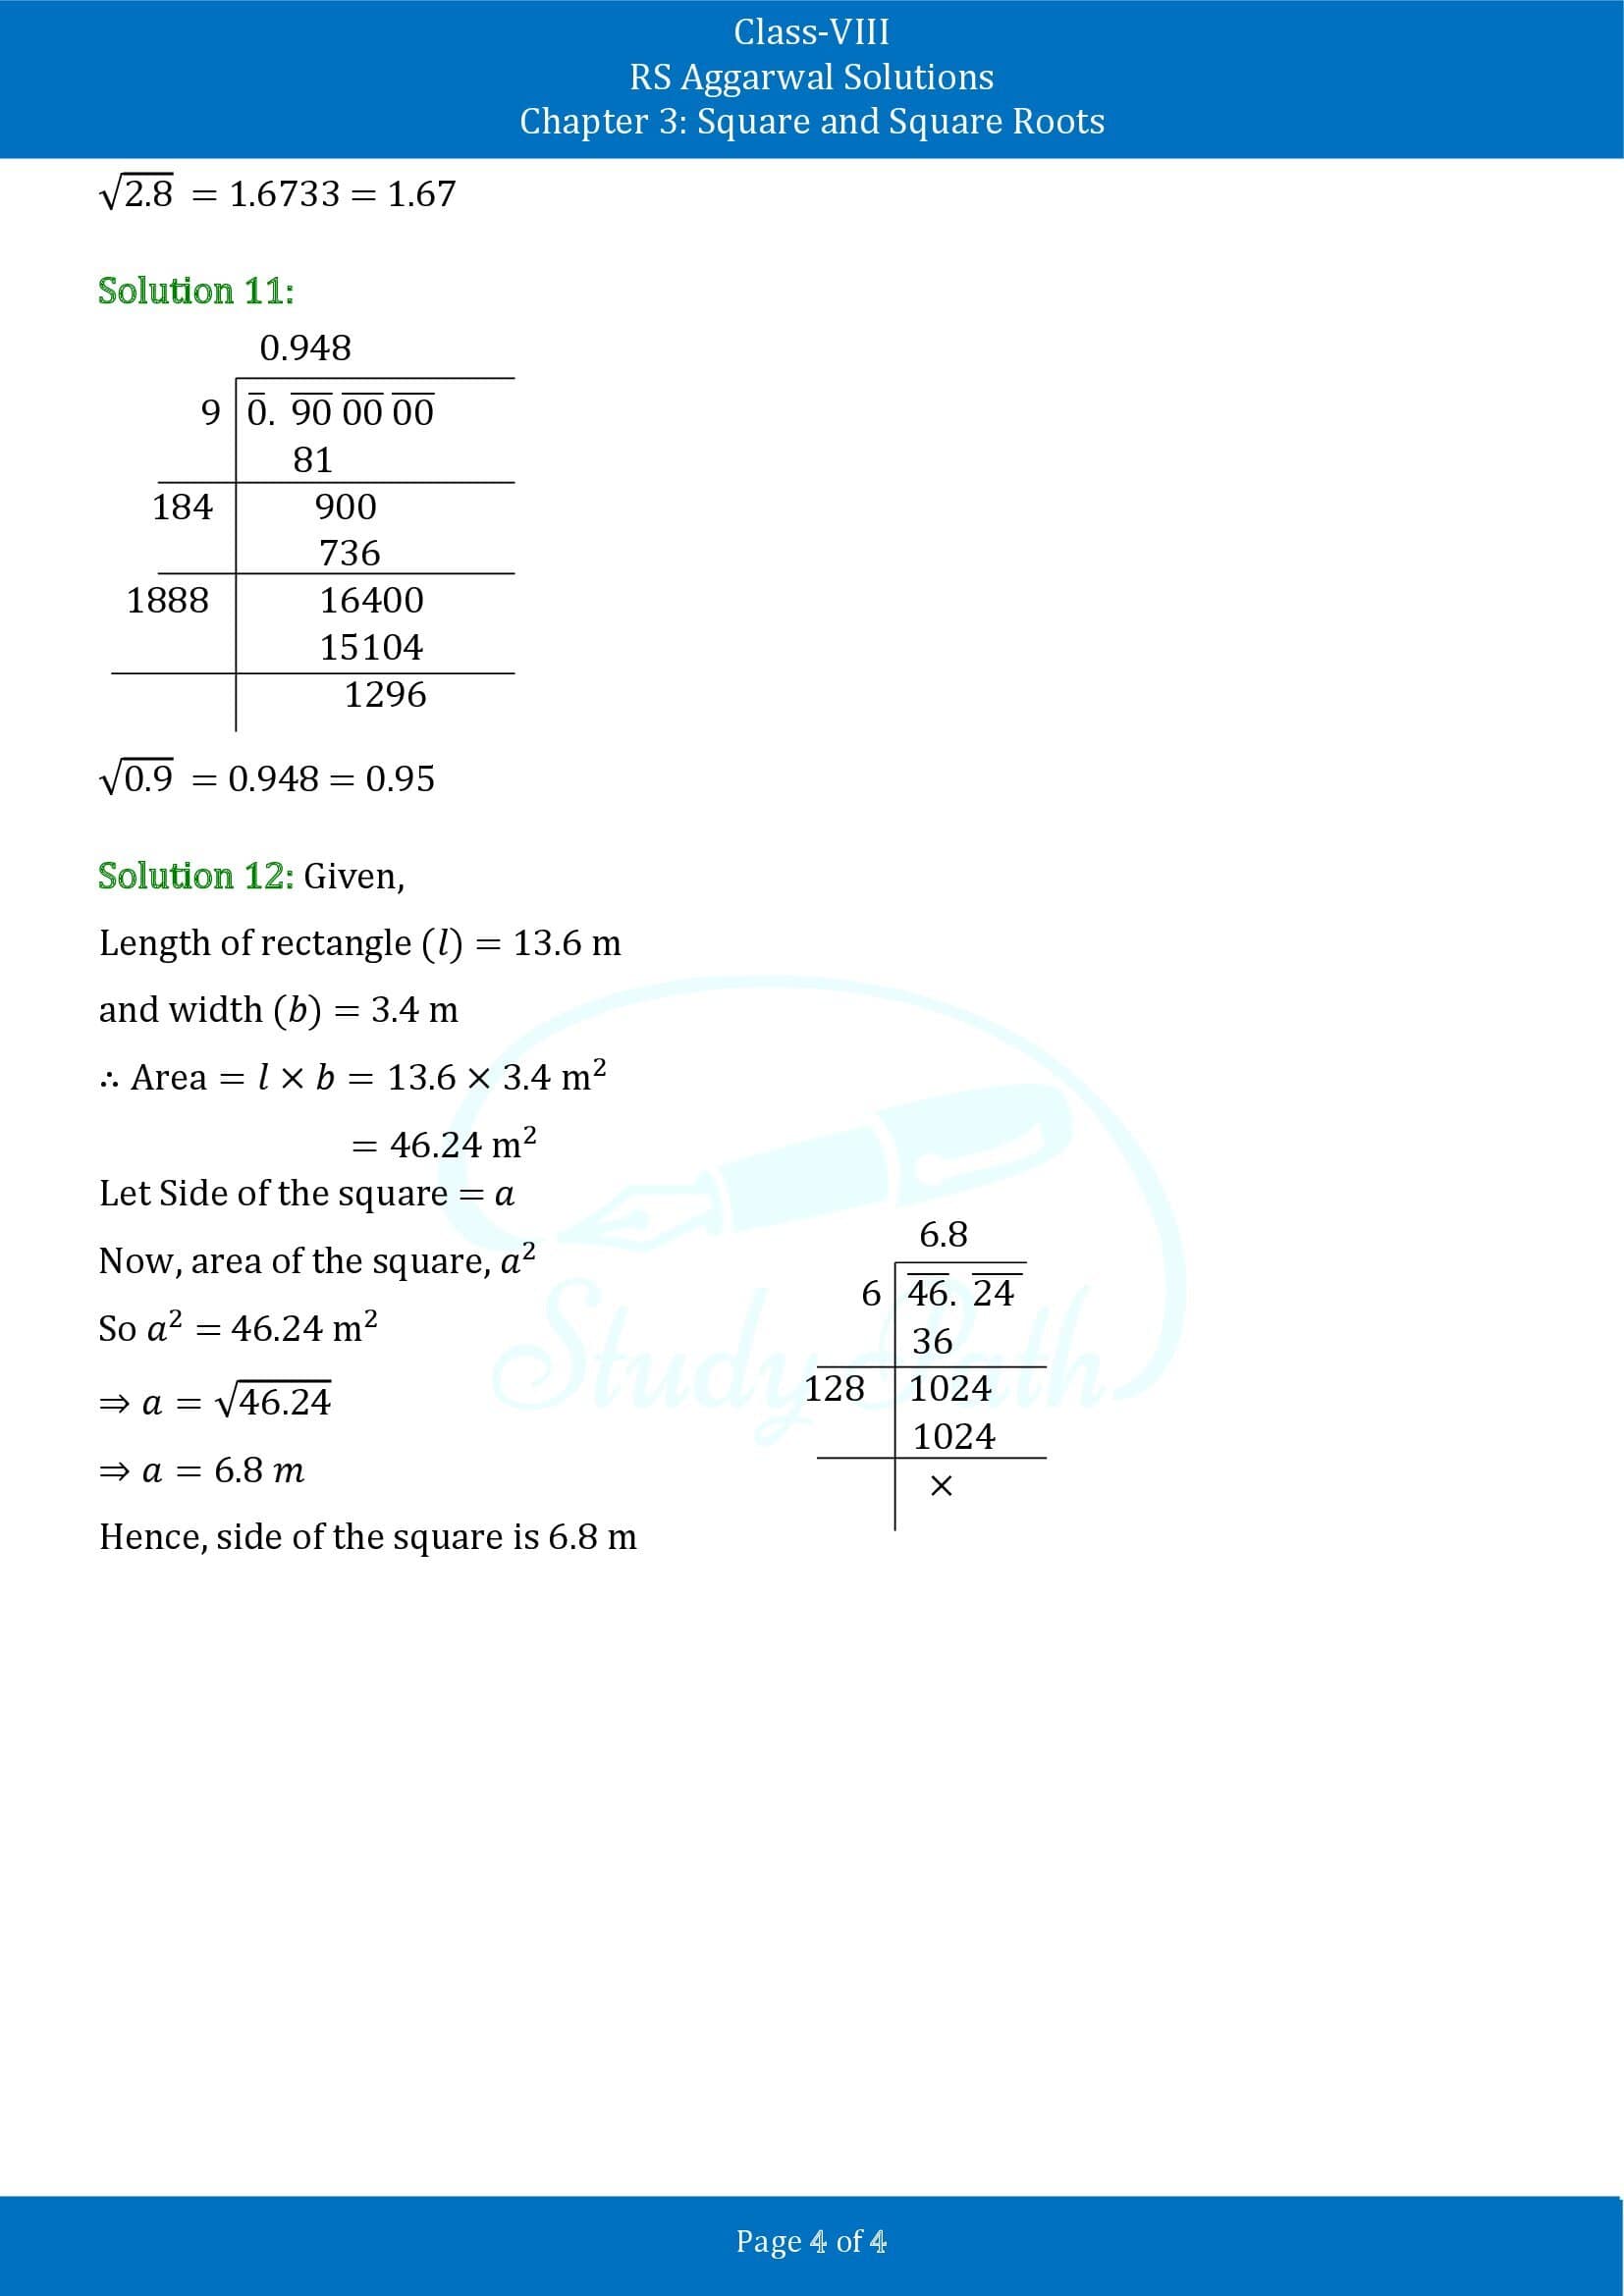 RS Aggarwal Solutions Class 8 Chapter 3 Square and Square Roots Exercise 3F 00004